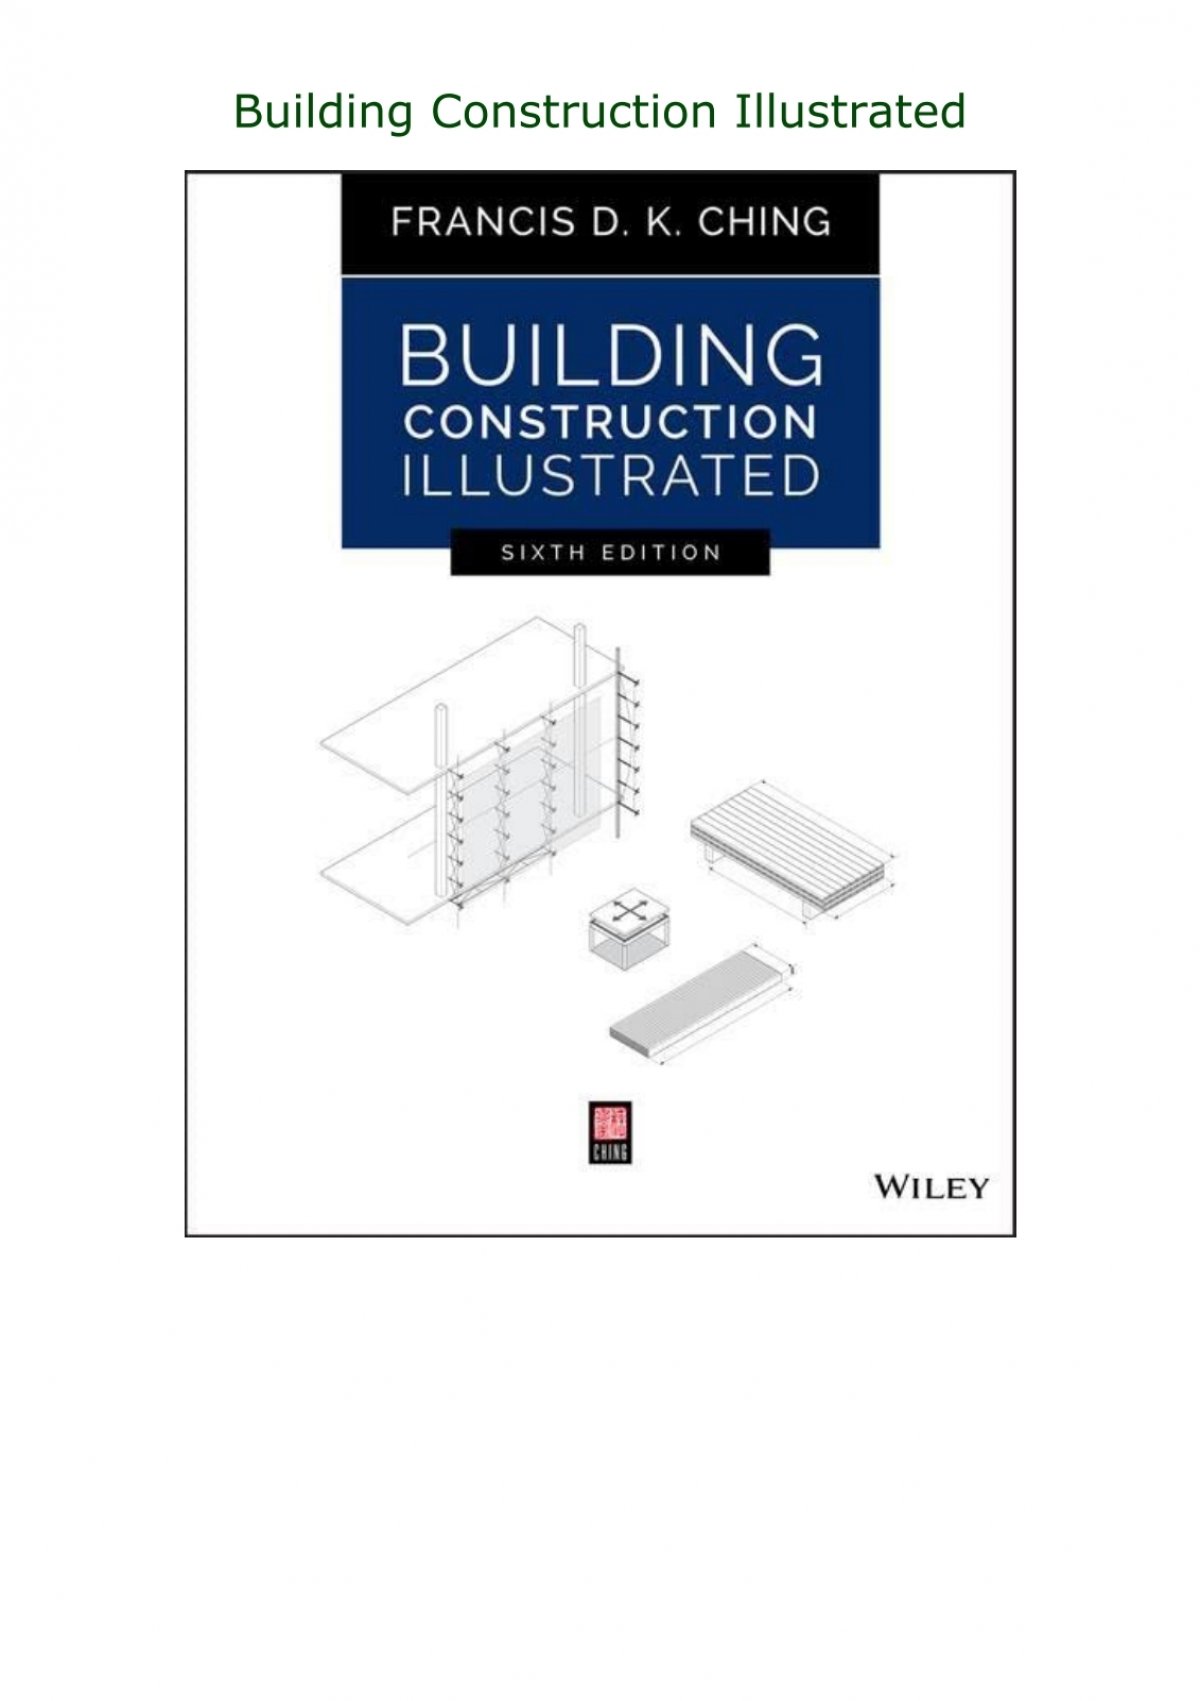 building construction illustrated 4th edition pdf free download